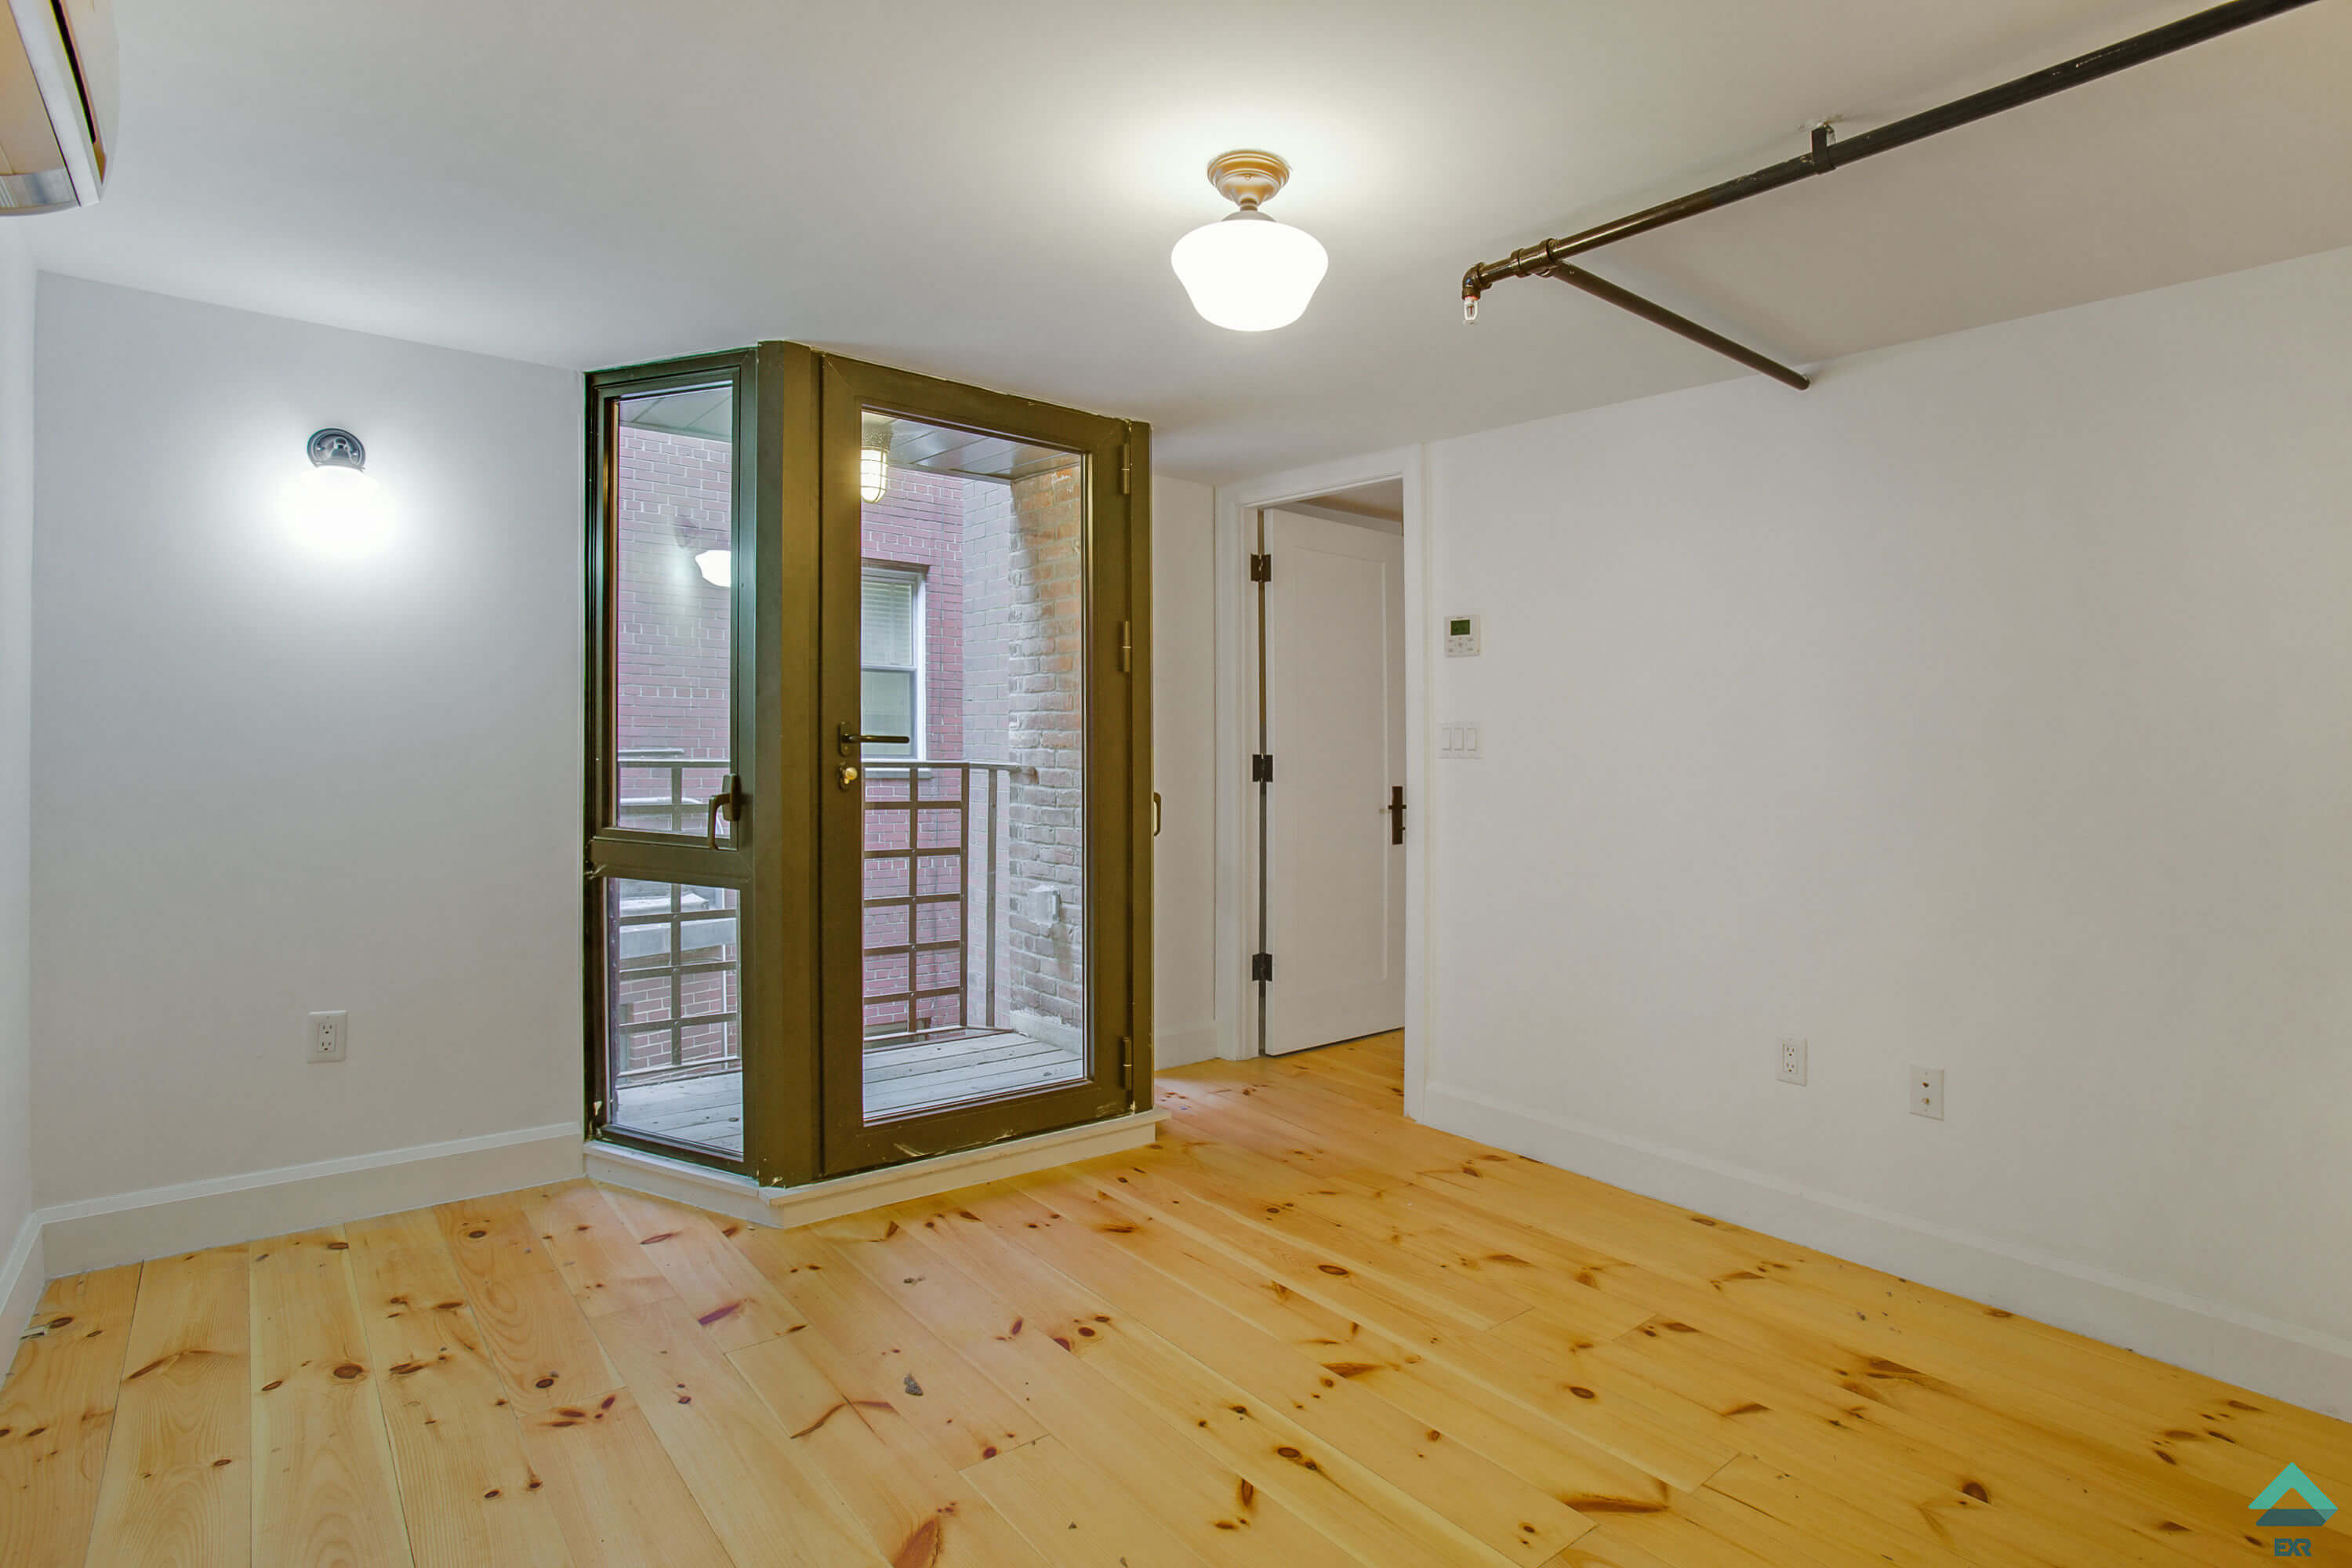 Brooklyn Apartments for Rent in Wiiliamsburg at 163 N. 6th Street 